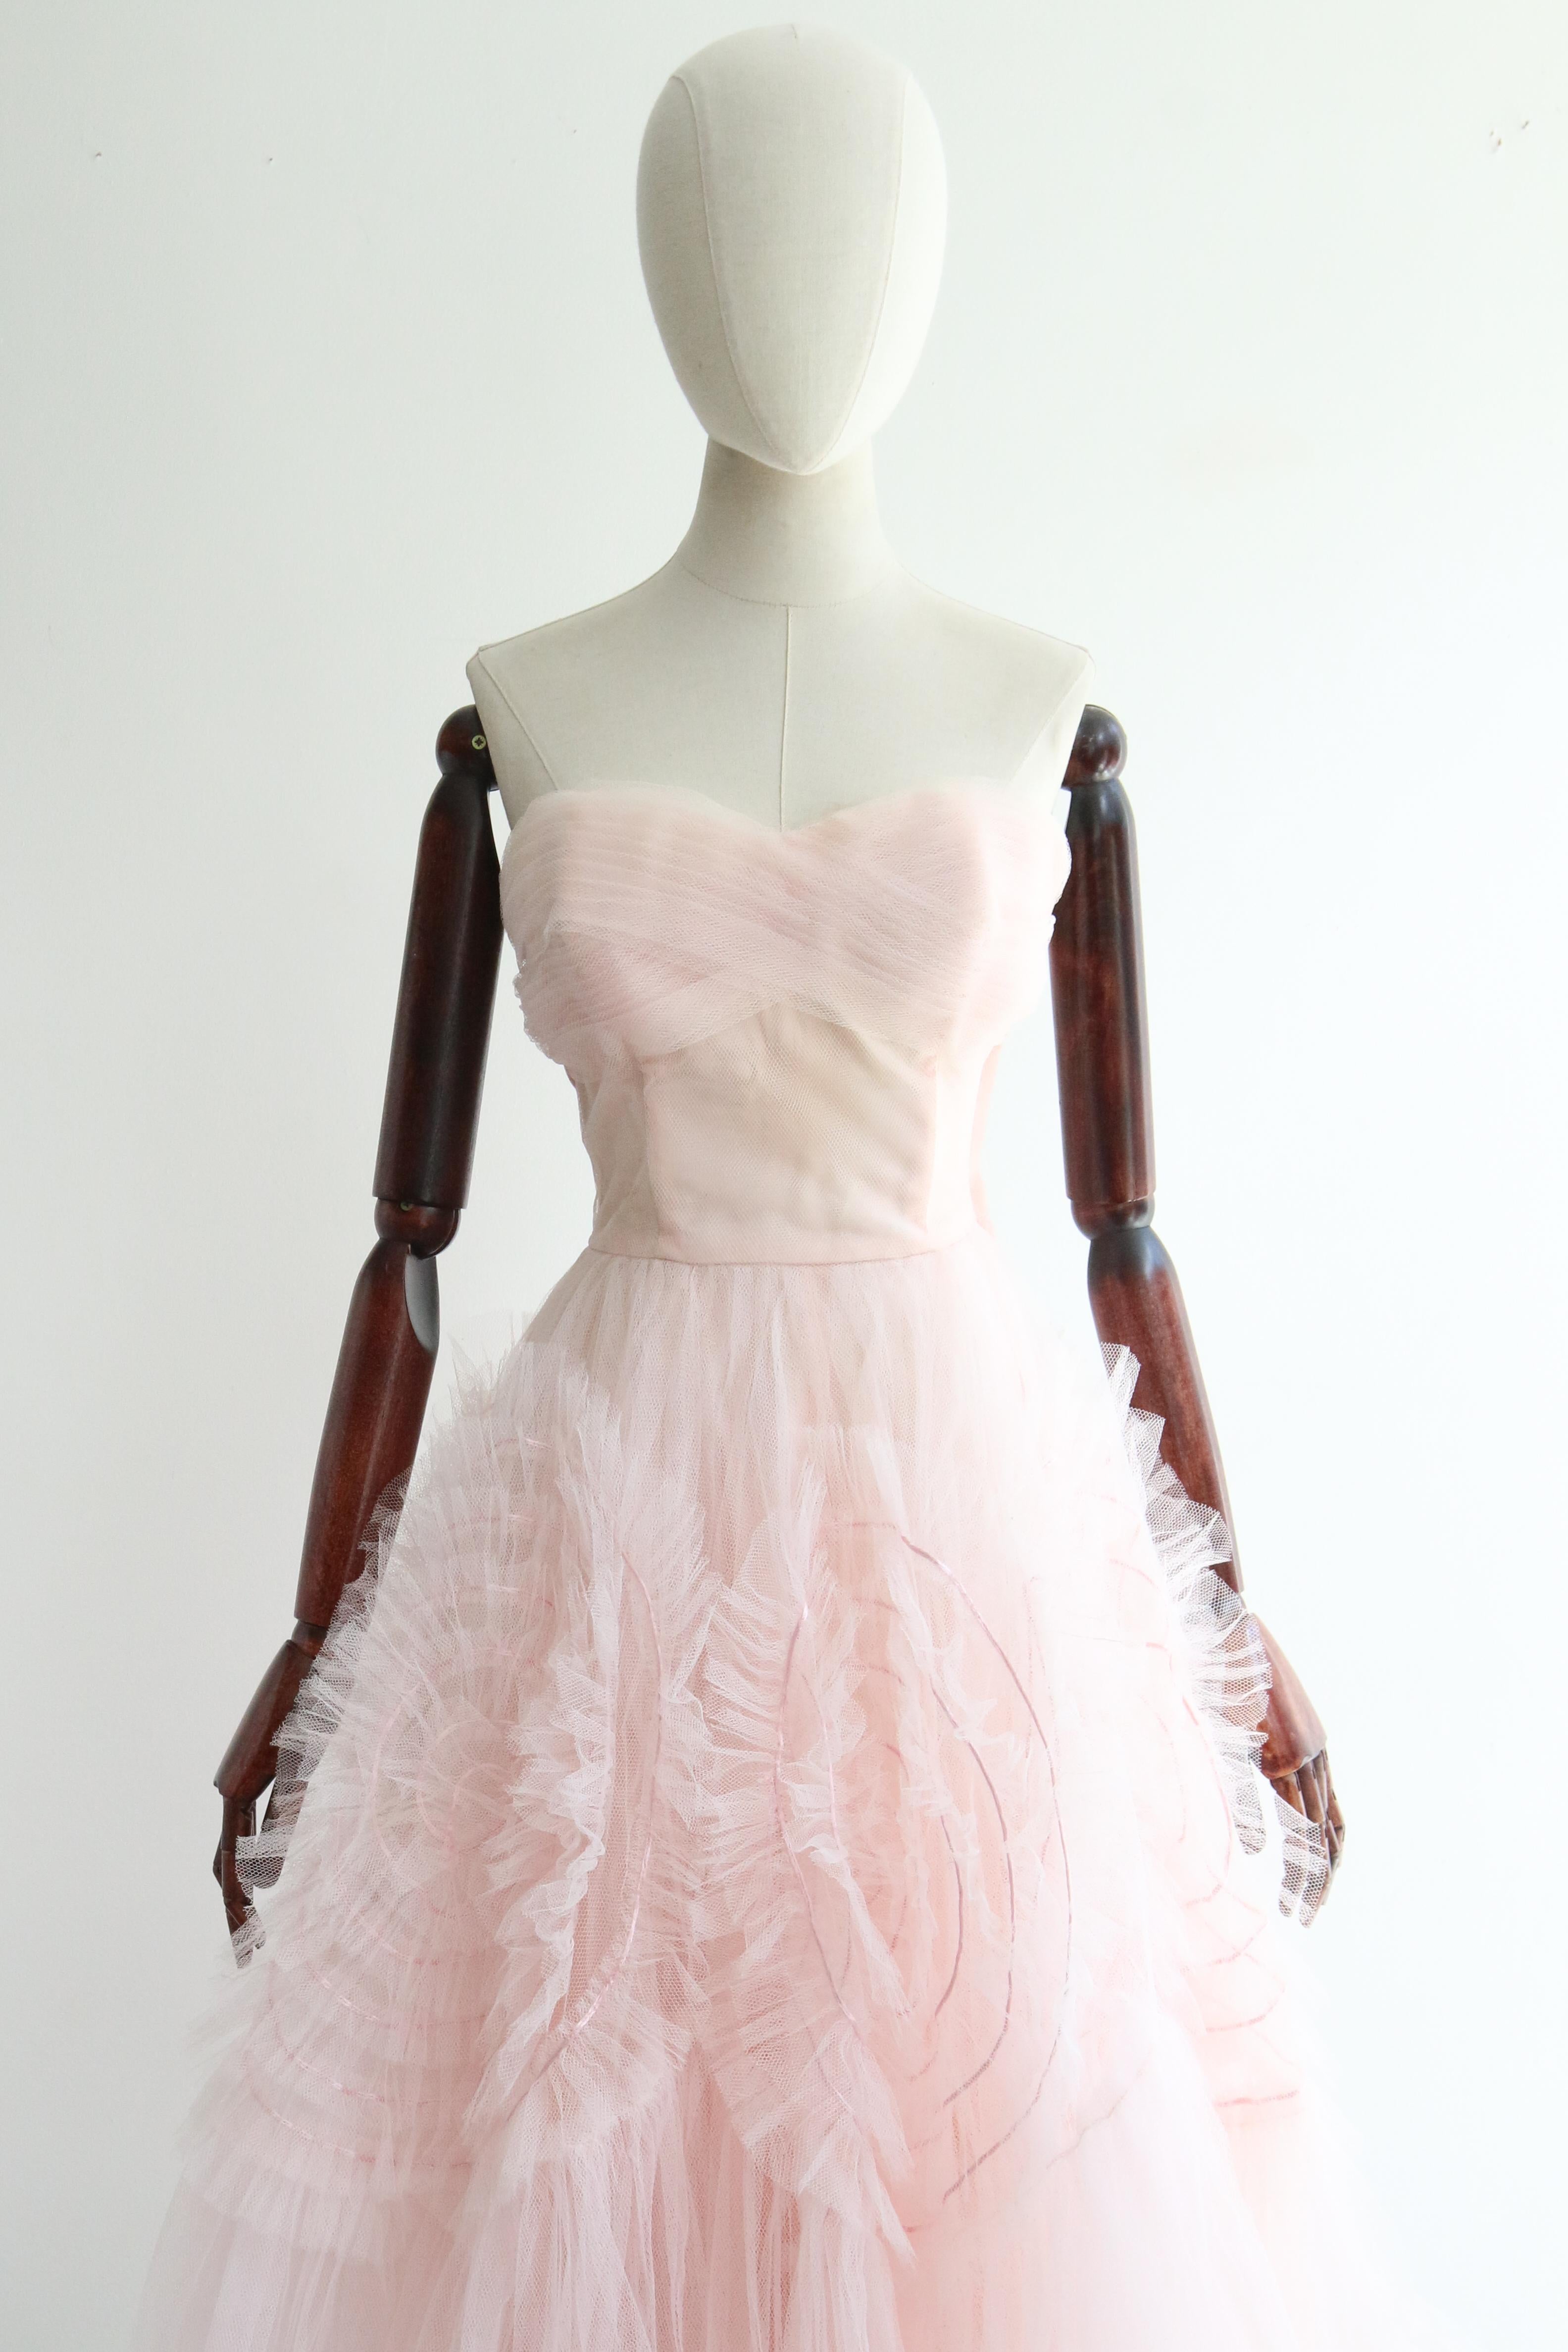 This iconic 1950's dress, rendered in layers of pink tulle, with delicate circular satin details, is just the piece for that special occasion. 

The strapless cut of the dress, features a sweetheart neckline, which is accented by a border of pleated